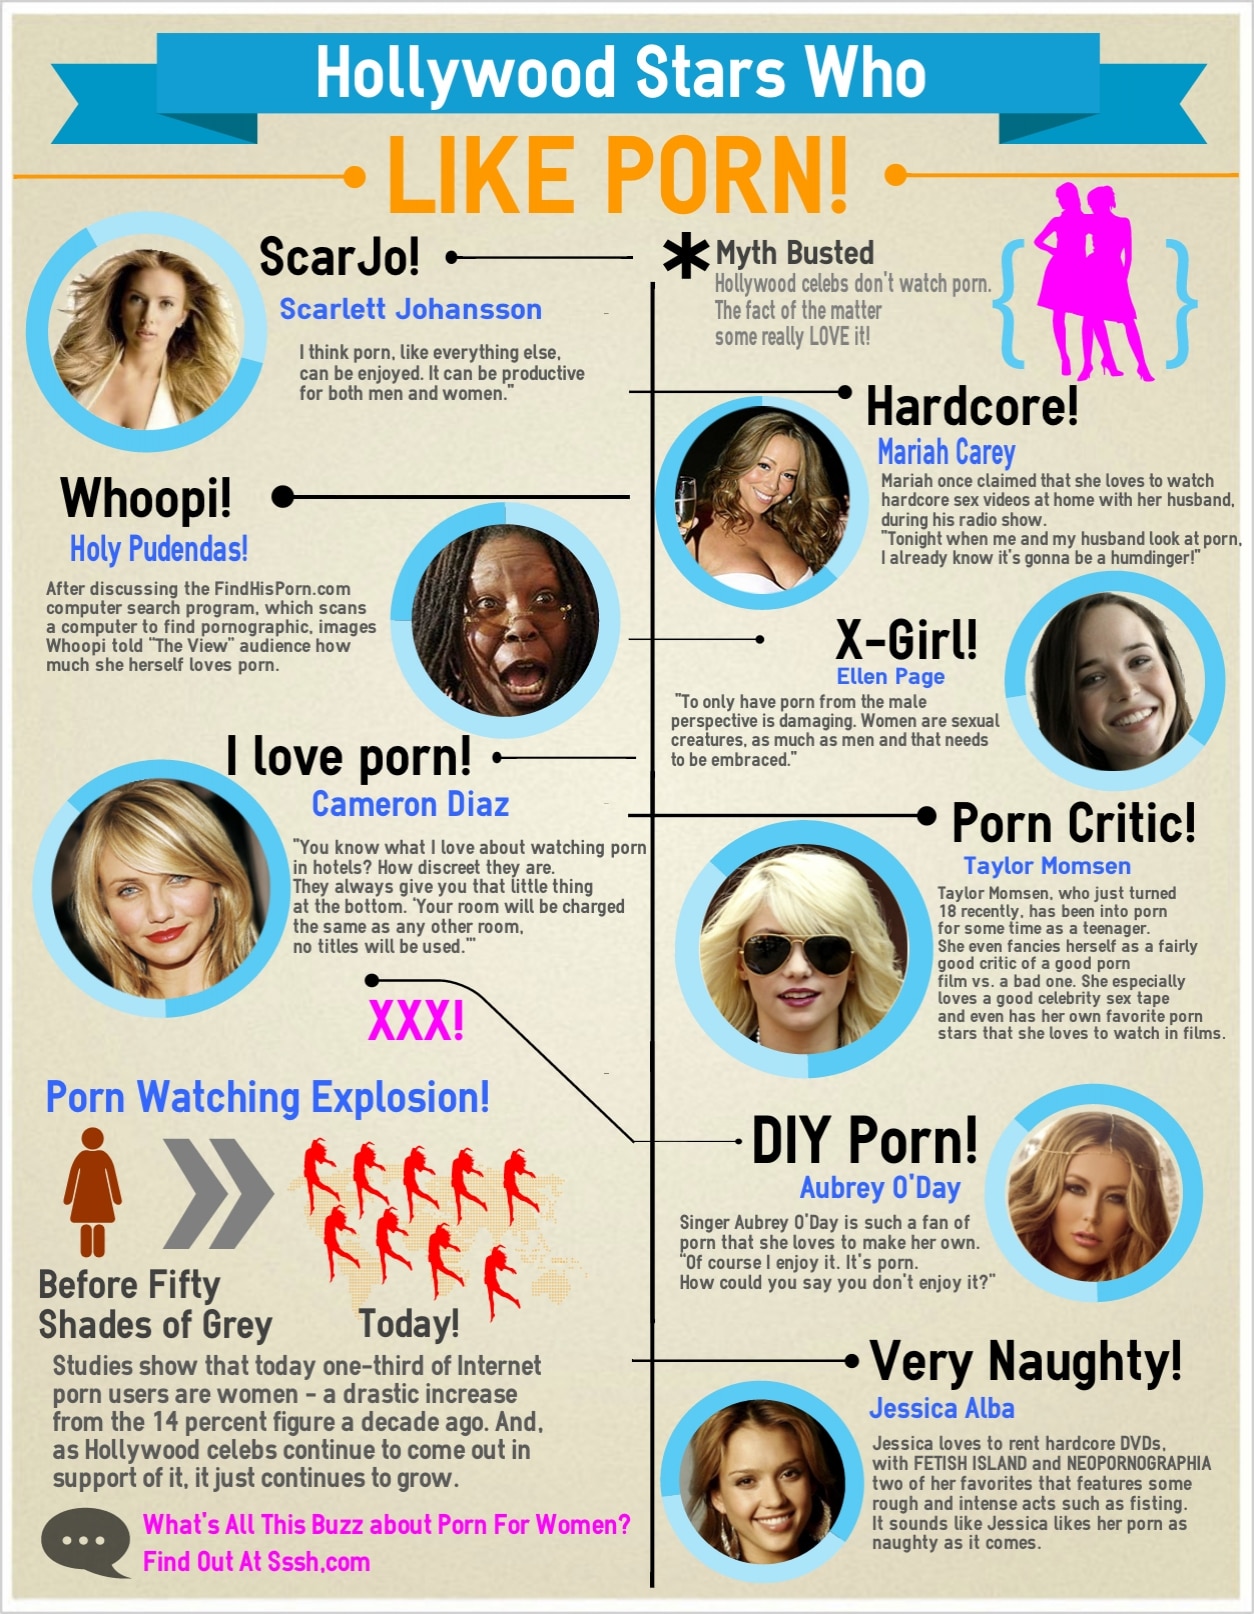 Hollywood To Porn - Infograph - Hollywood Stars and Celebs That Like Porn ...